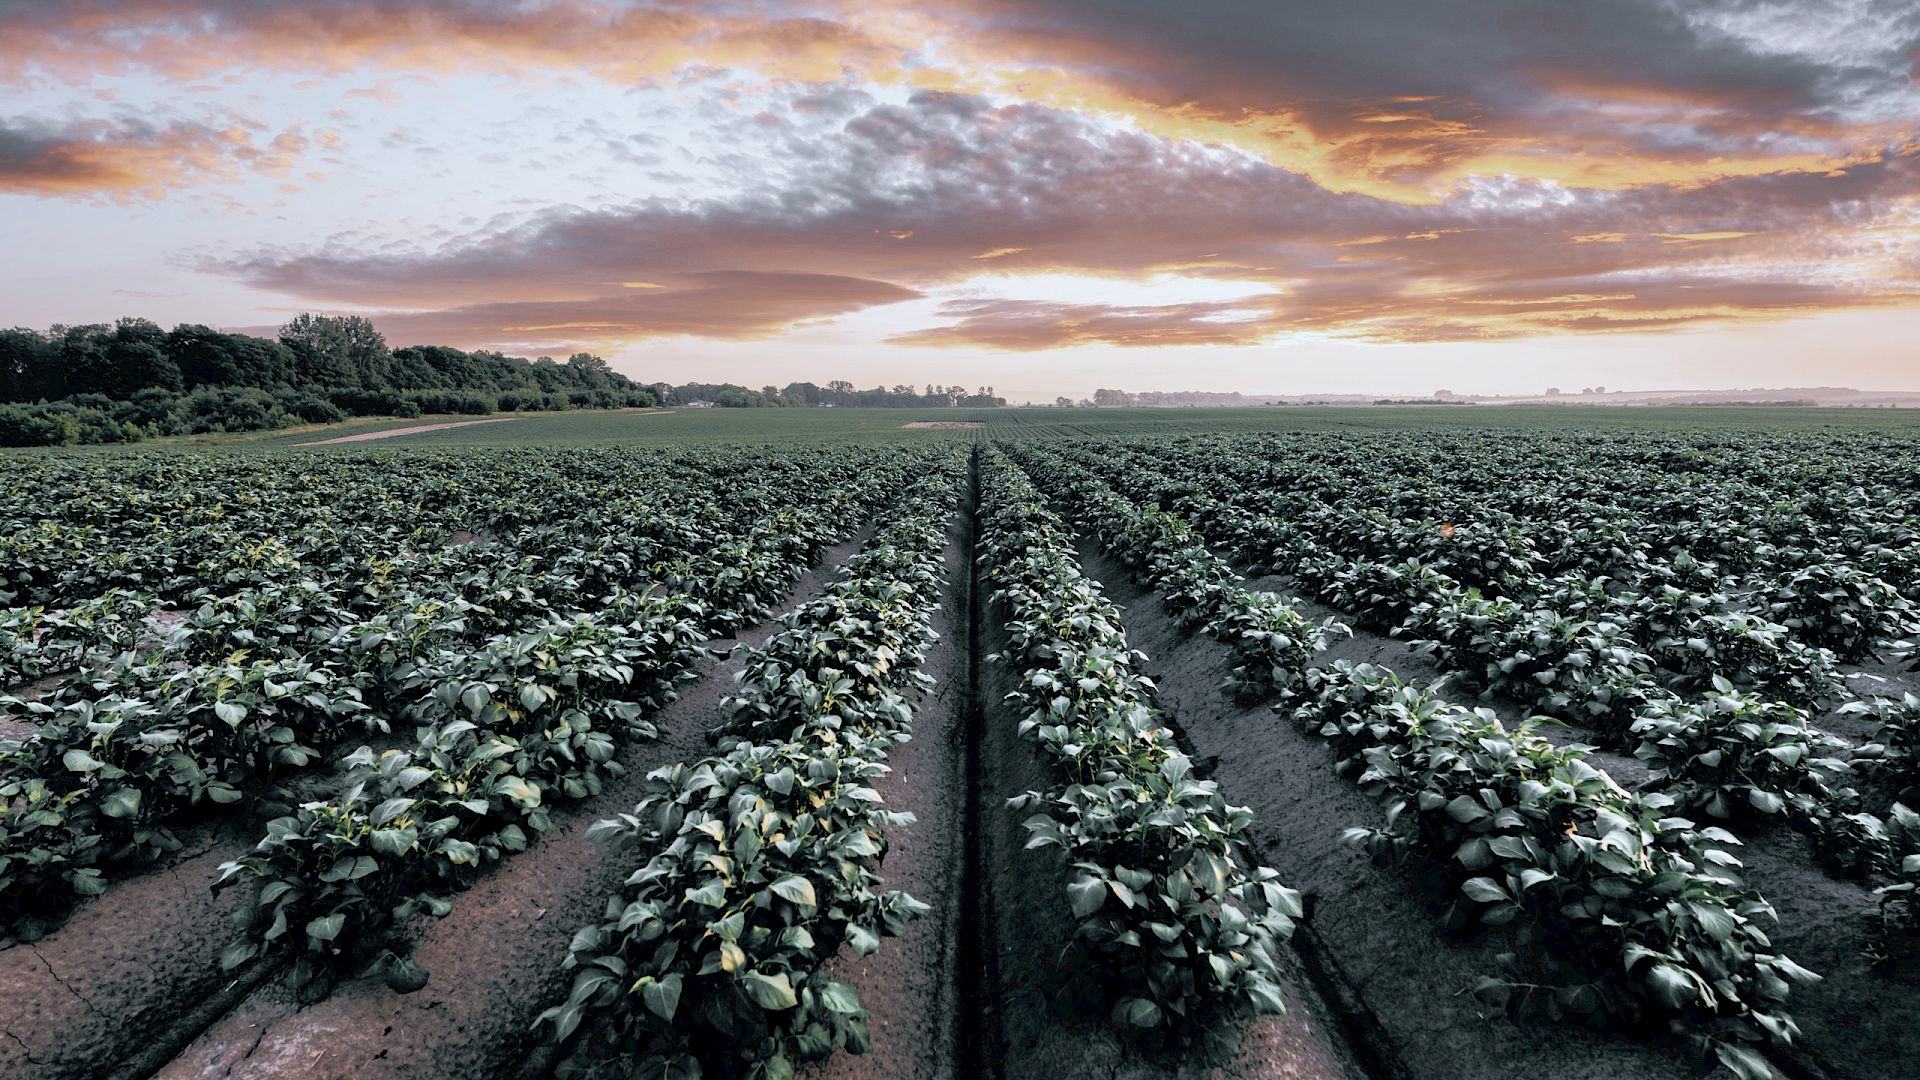 A field of potatoes at sunset